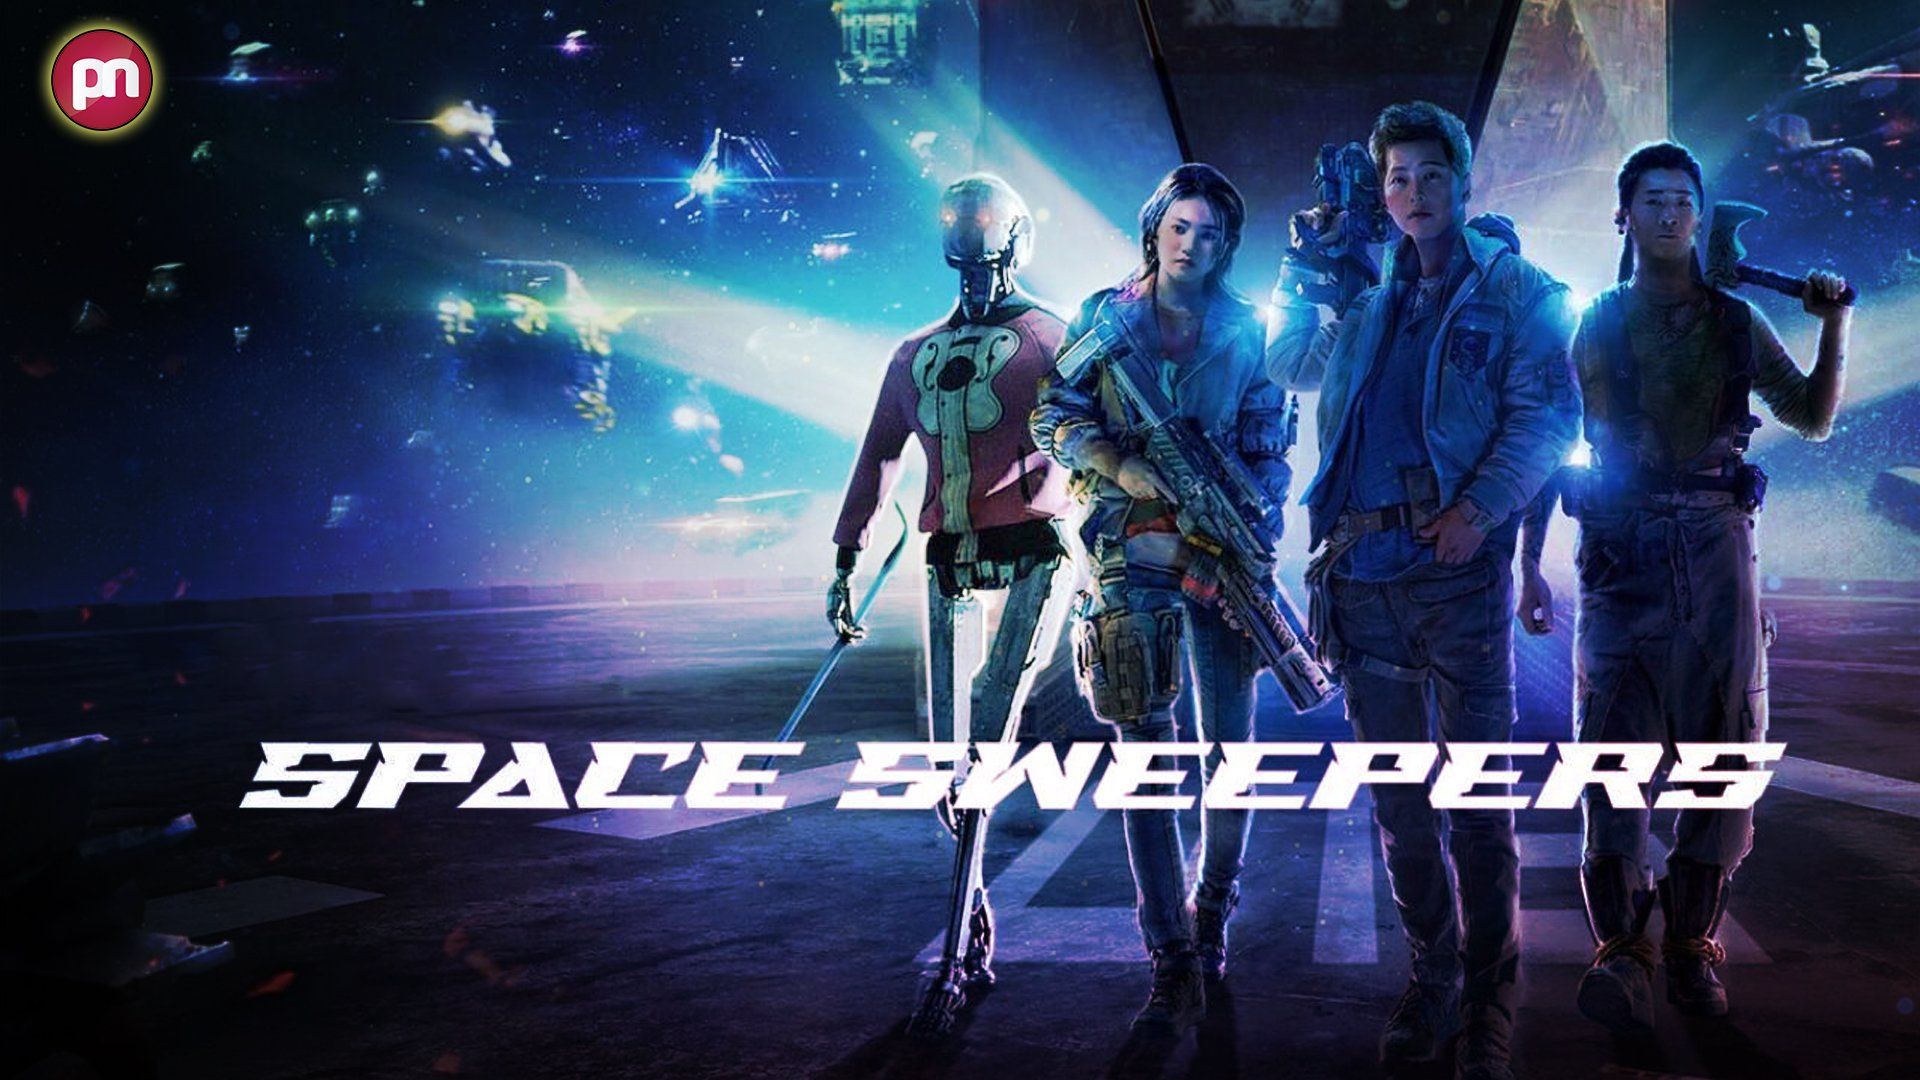 Space Sweepers: When Will It Happen On Screens?